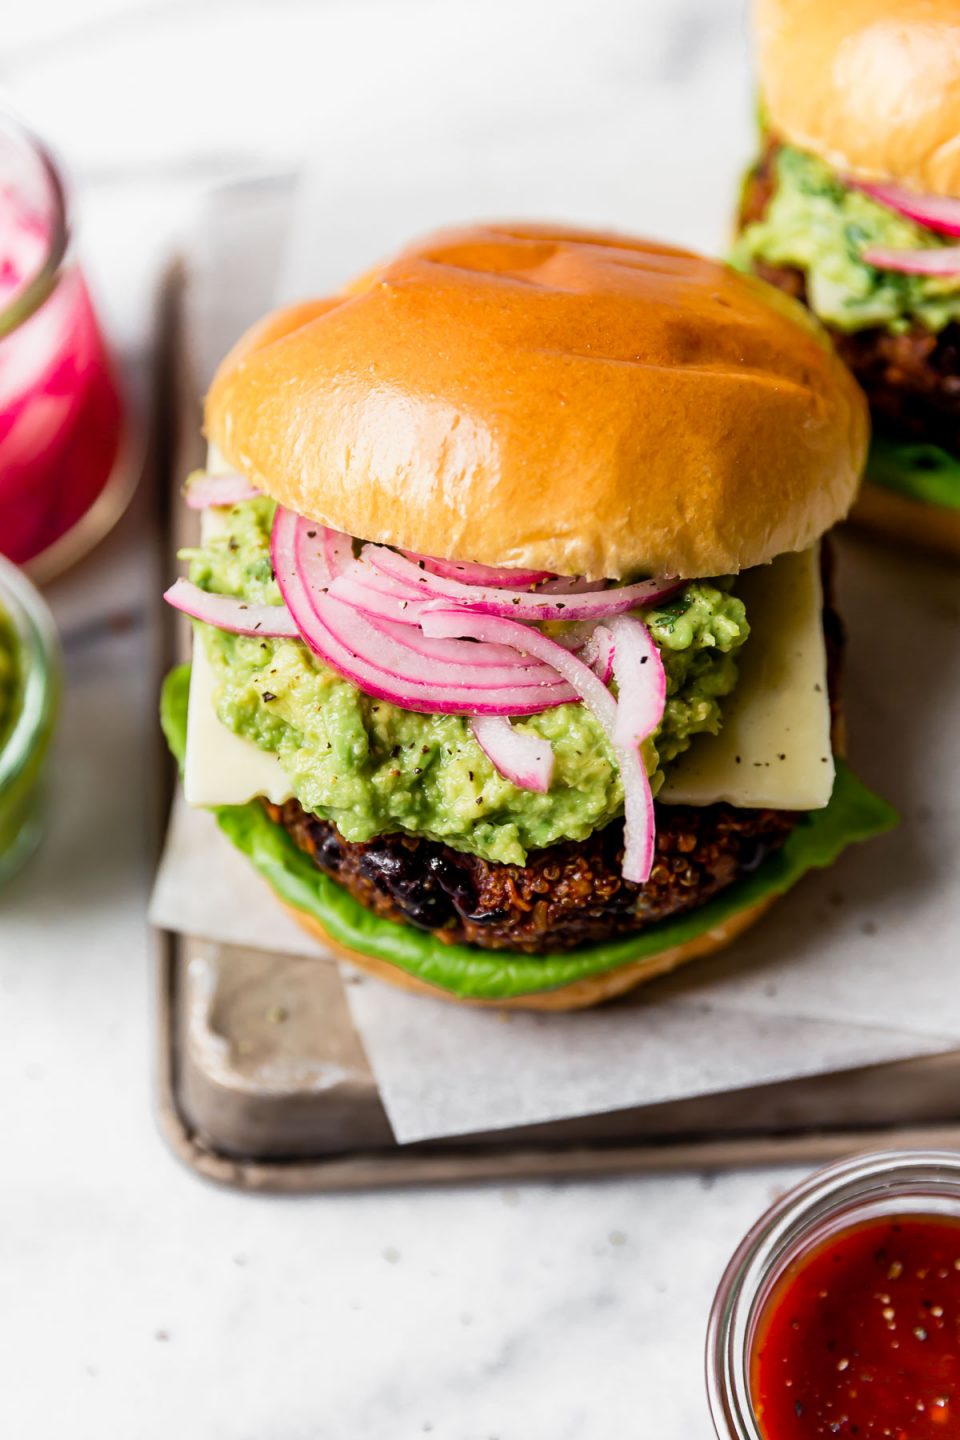 Overhead view of grilled Black Bean Burgers on brioche buns, topped with lettuce, cheese, guacamole & pickled red onion. The burgers are placed on a small metal tray, with jars of guacamole & pickled red onions in the background.